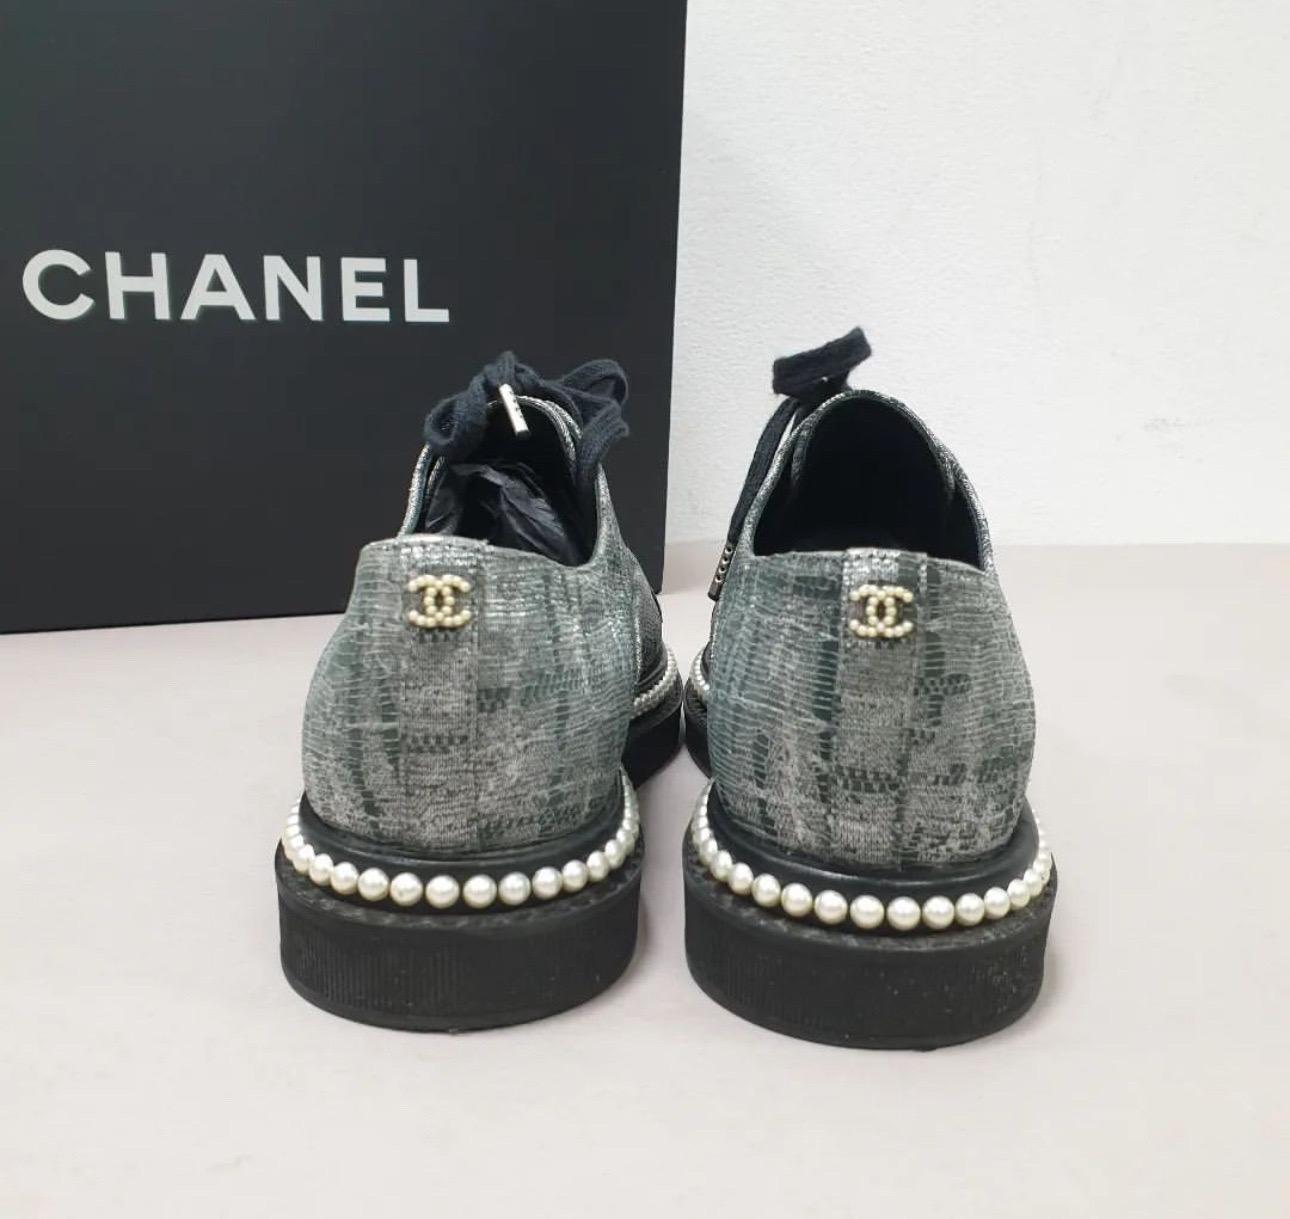 CHANEL 2017  Lace Up Pearls Sneakers In Good Condition For Sale In Krakow, PL